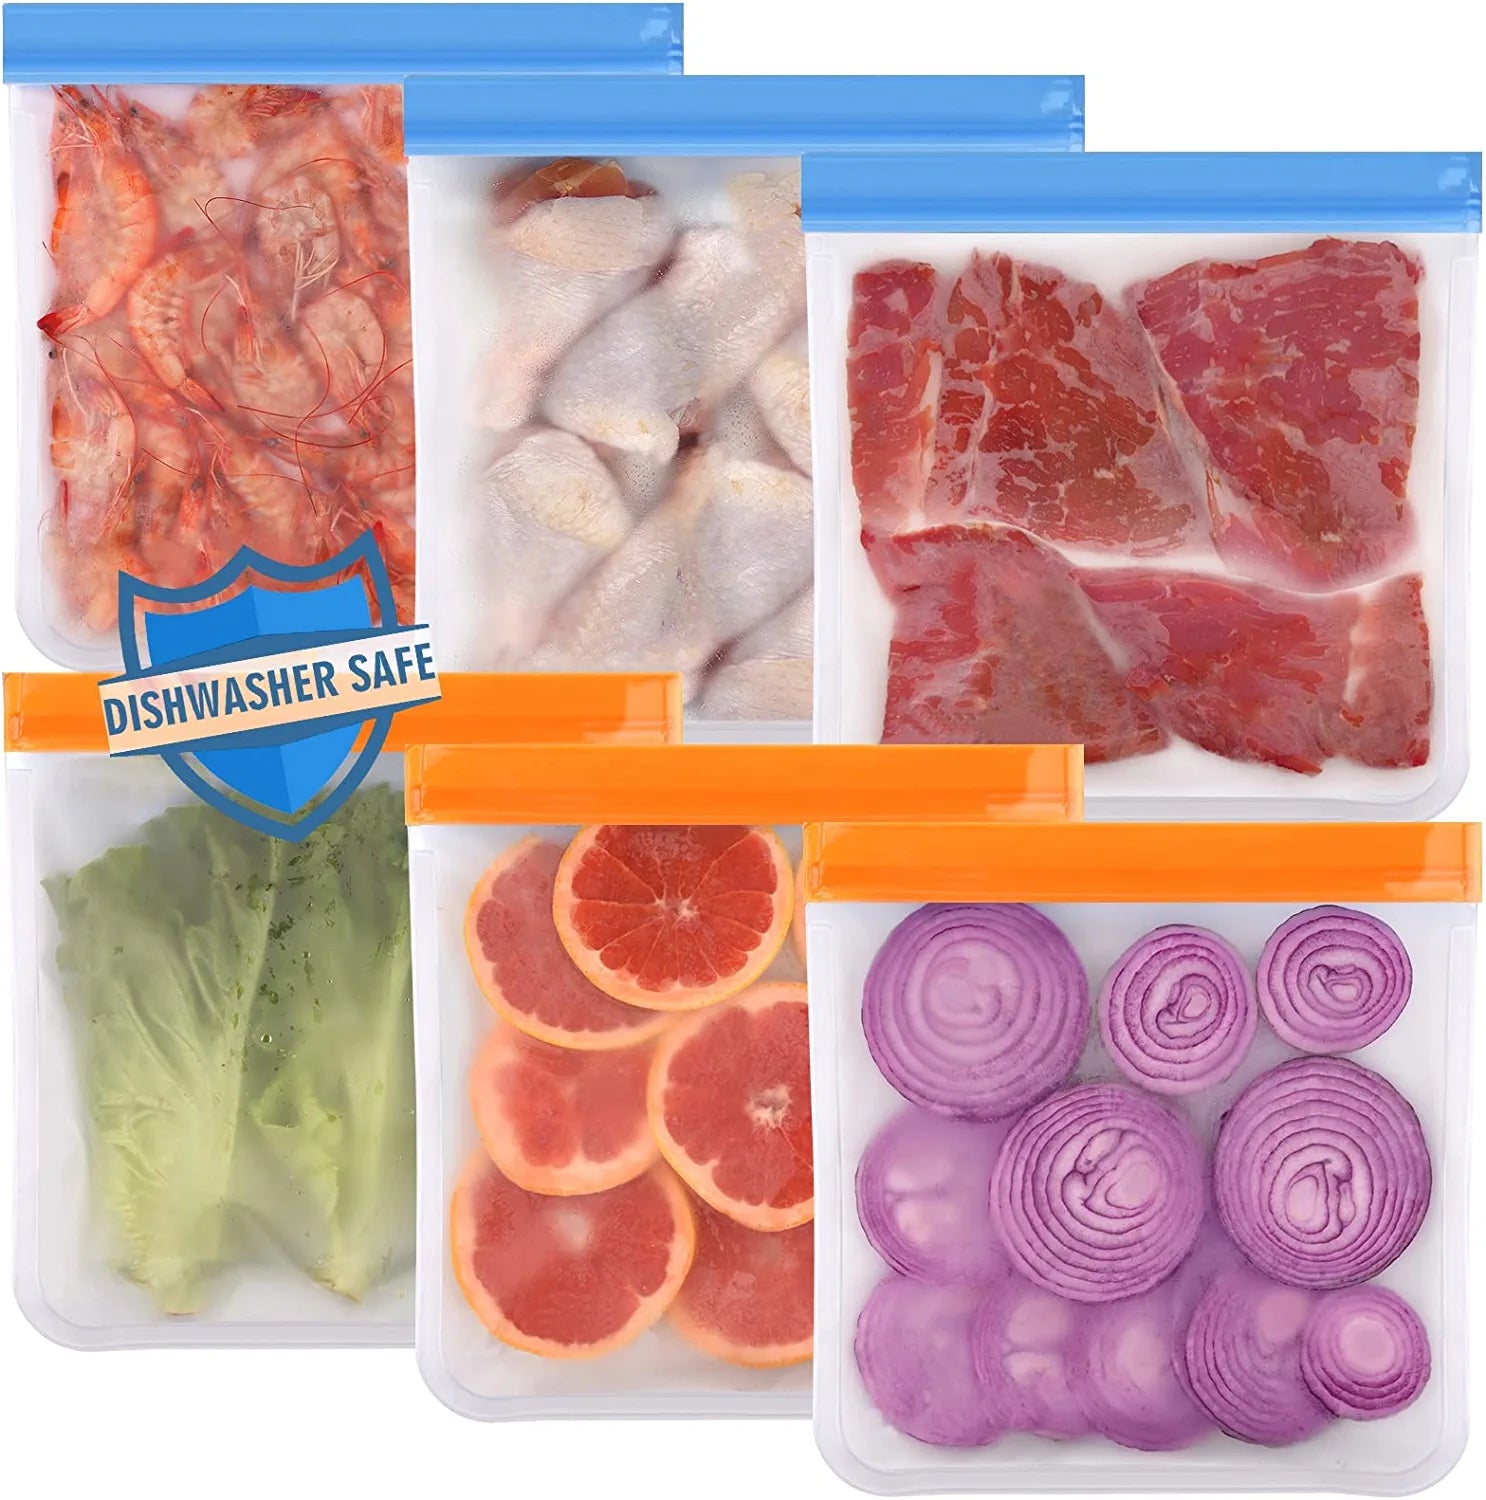 Reusable Gallon Bags, 4 Pack Reusable Freezer Bags Seal & Leak Proof, BPA  Free Reusable Gallon Freezer Bags for Travel, Marinate Meats, Fruit or Food